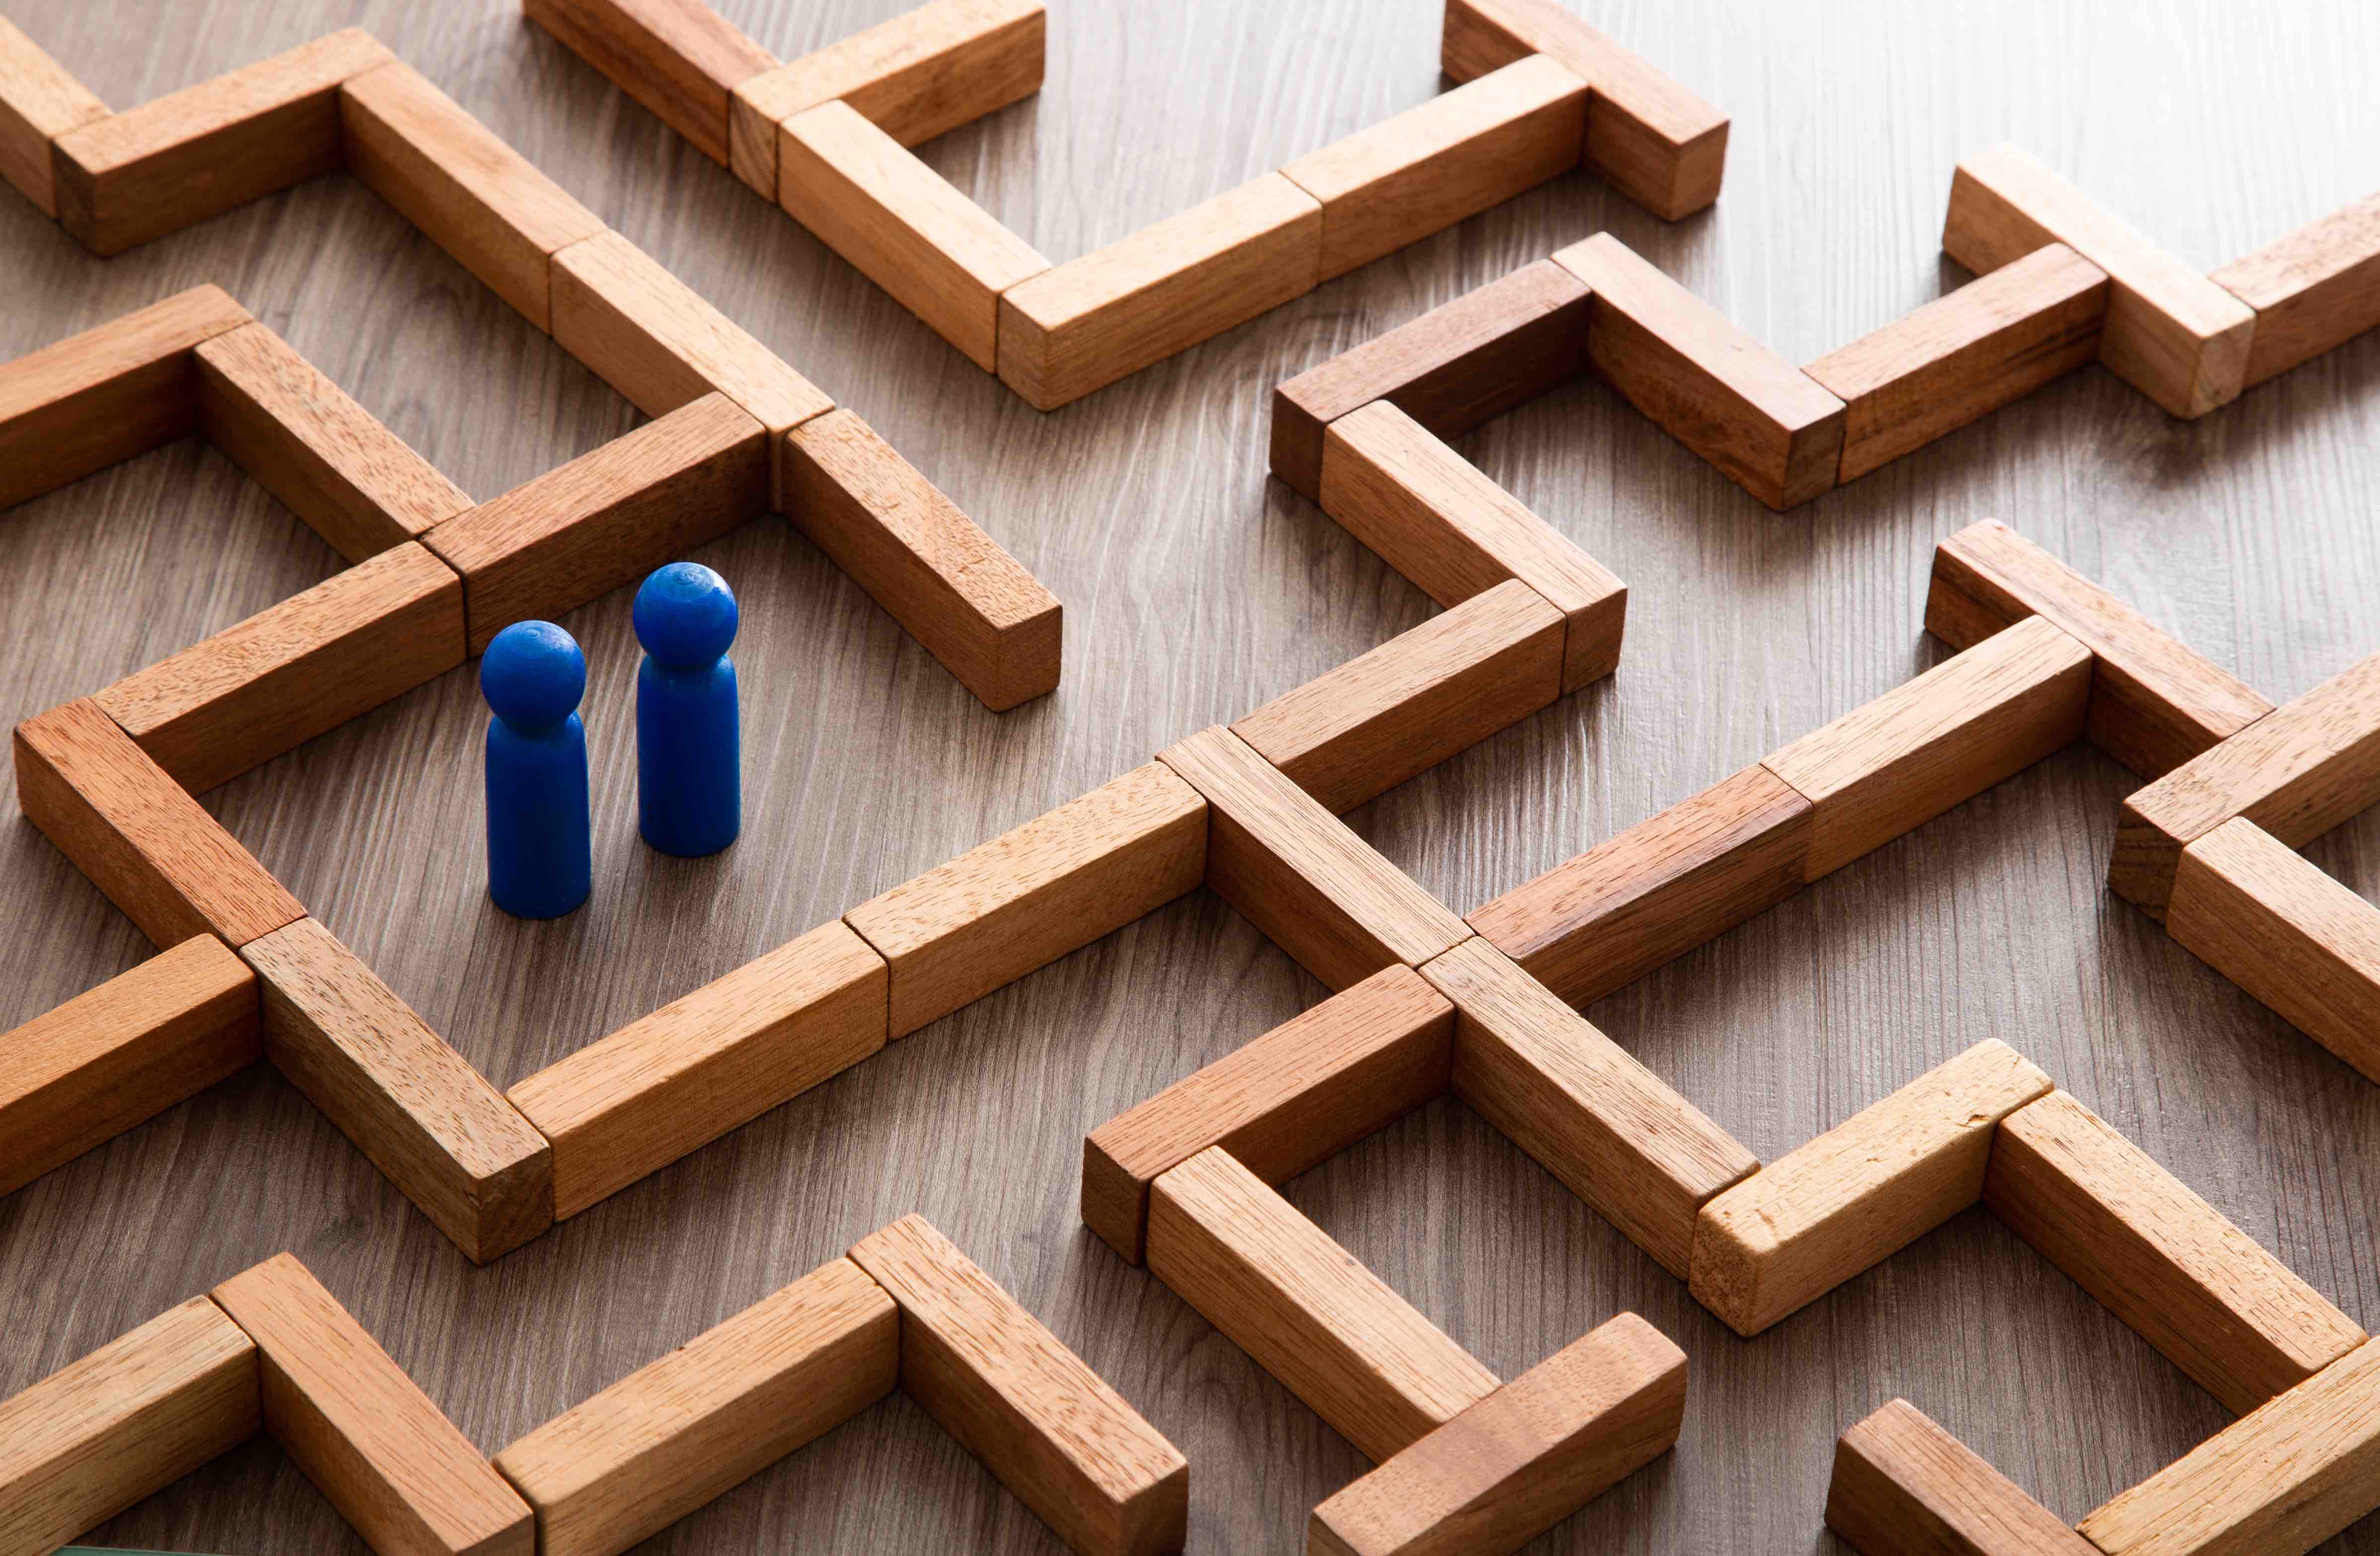 Two blue game figures sanding at the center of a maze made of wooden blocks 